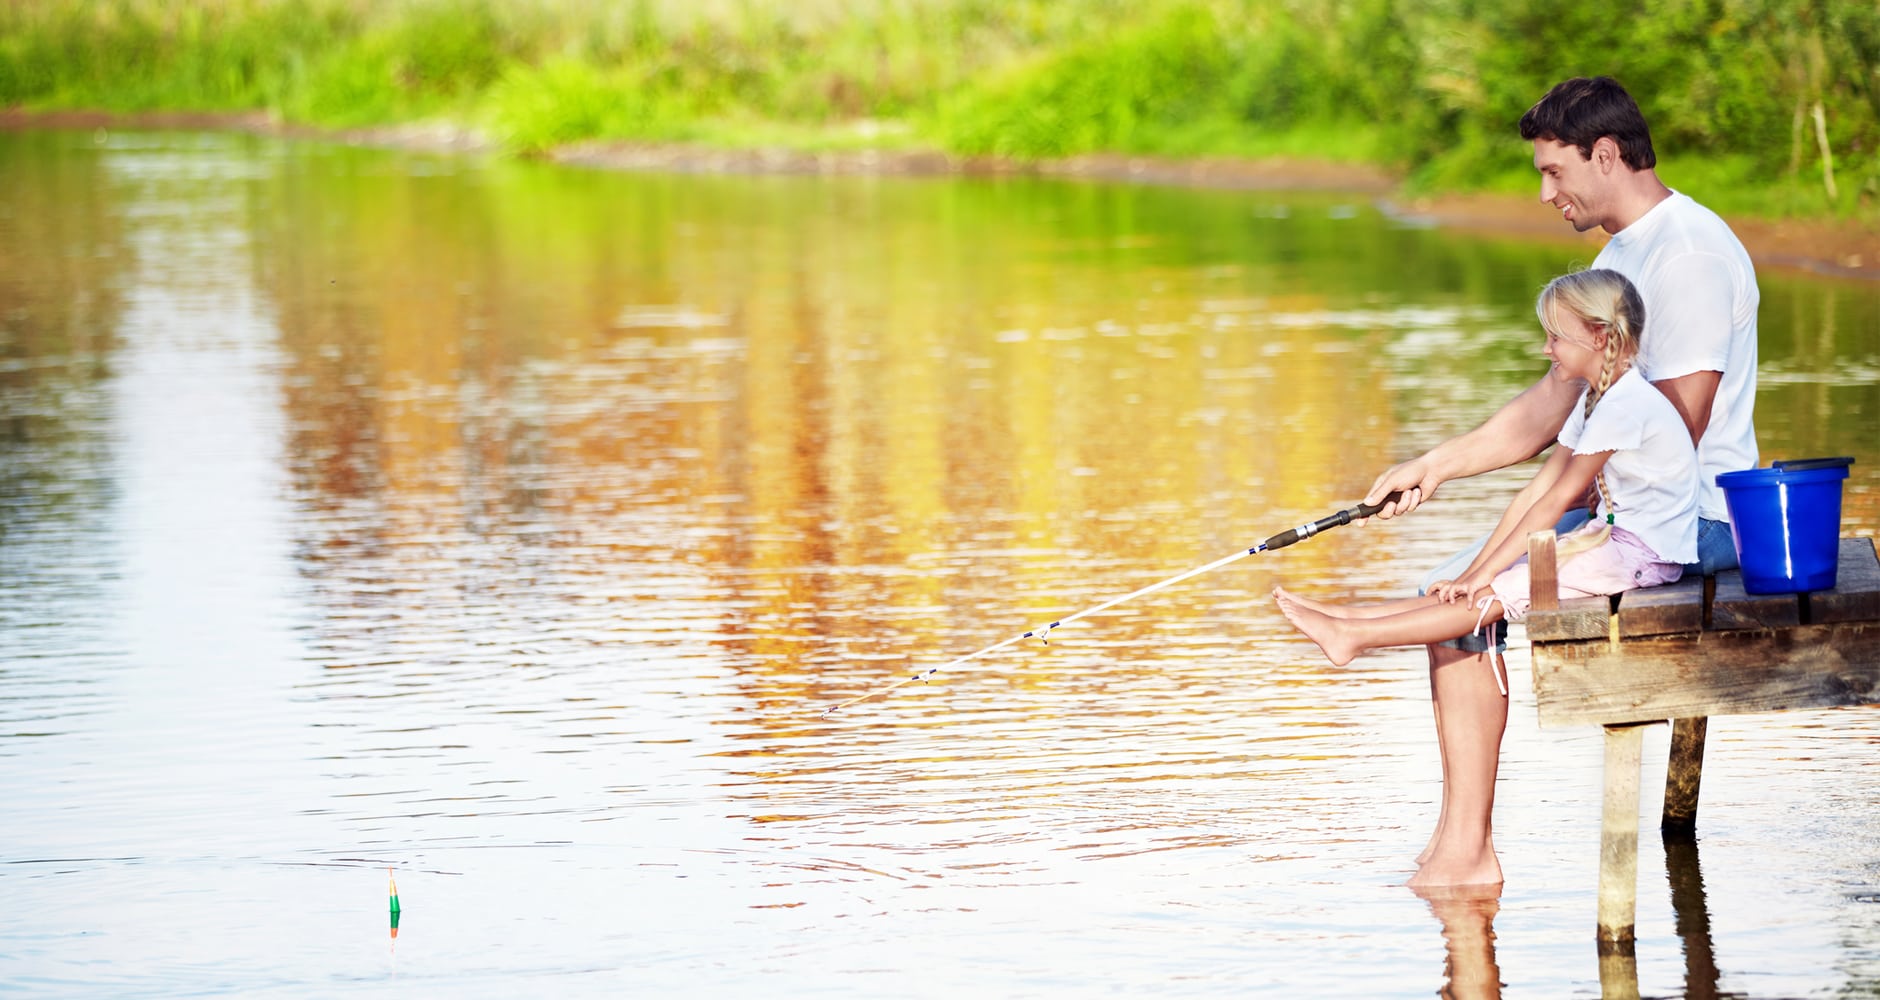 Memories of their fathers - girl fishing with father